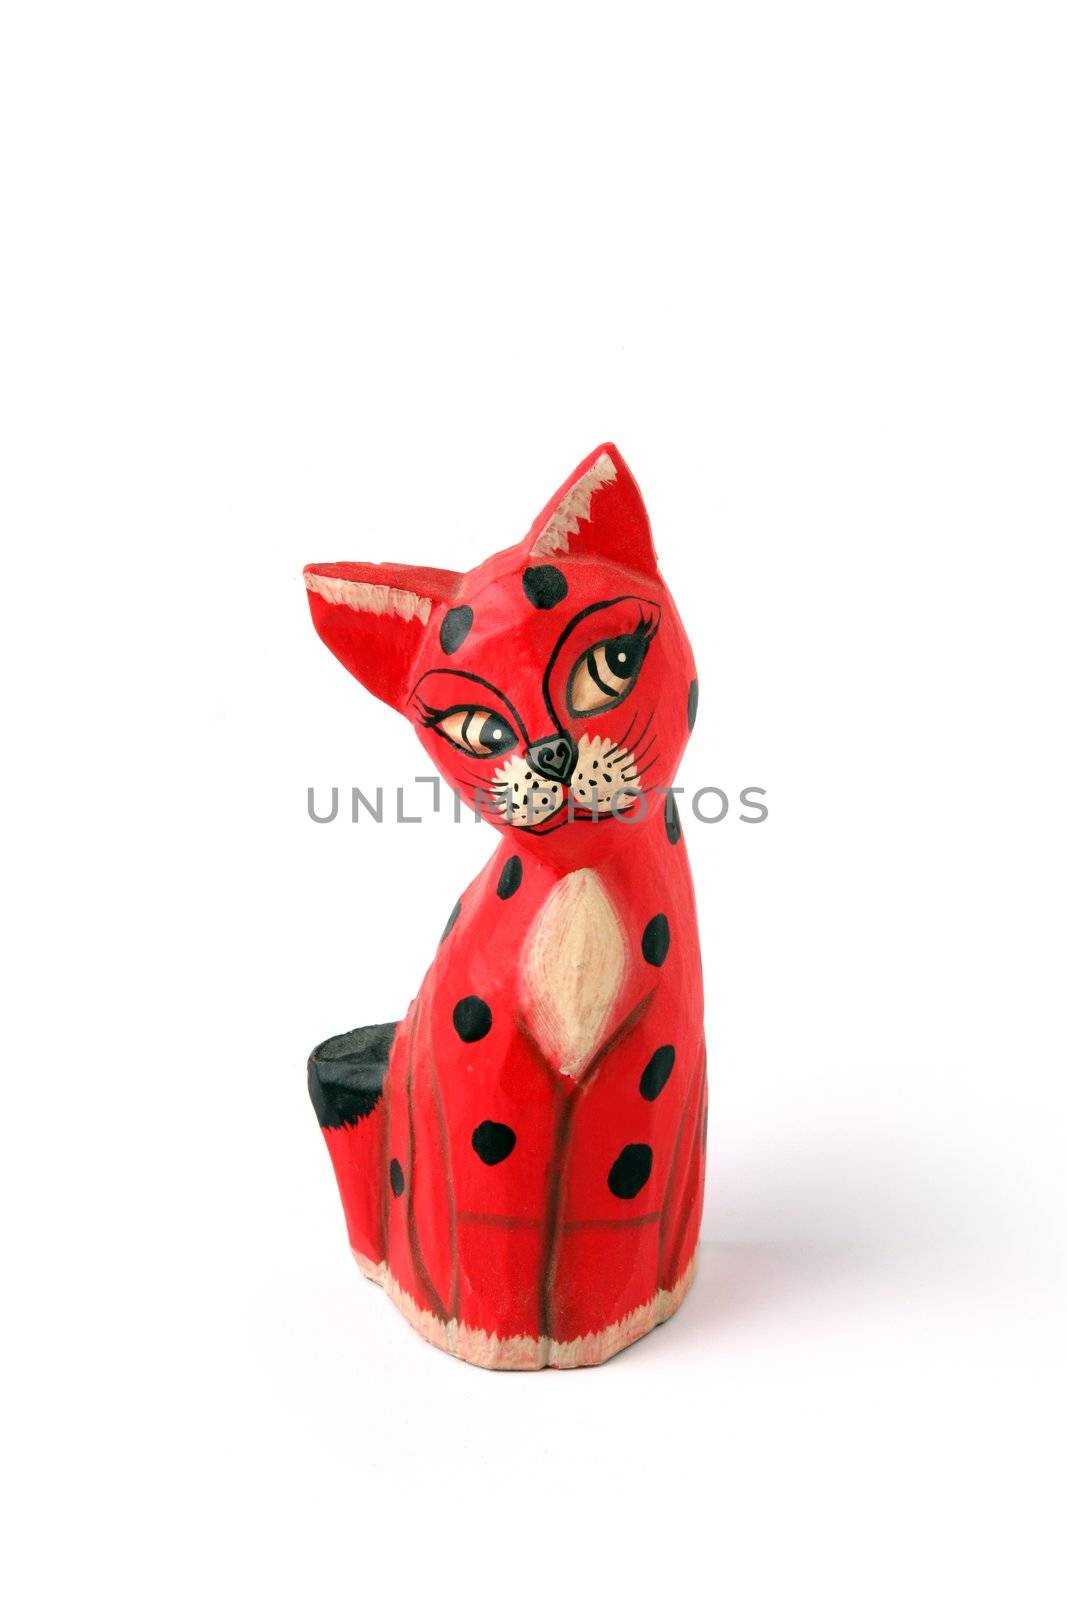 Painted wooden cat by phovoir